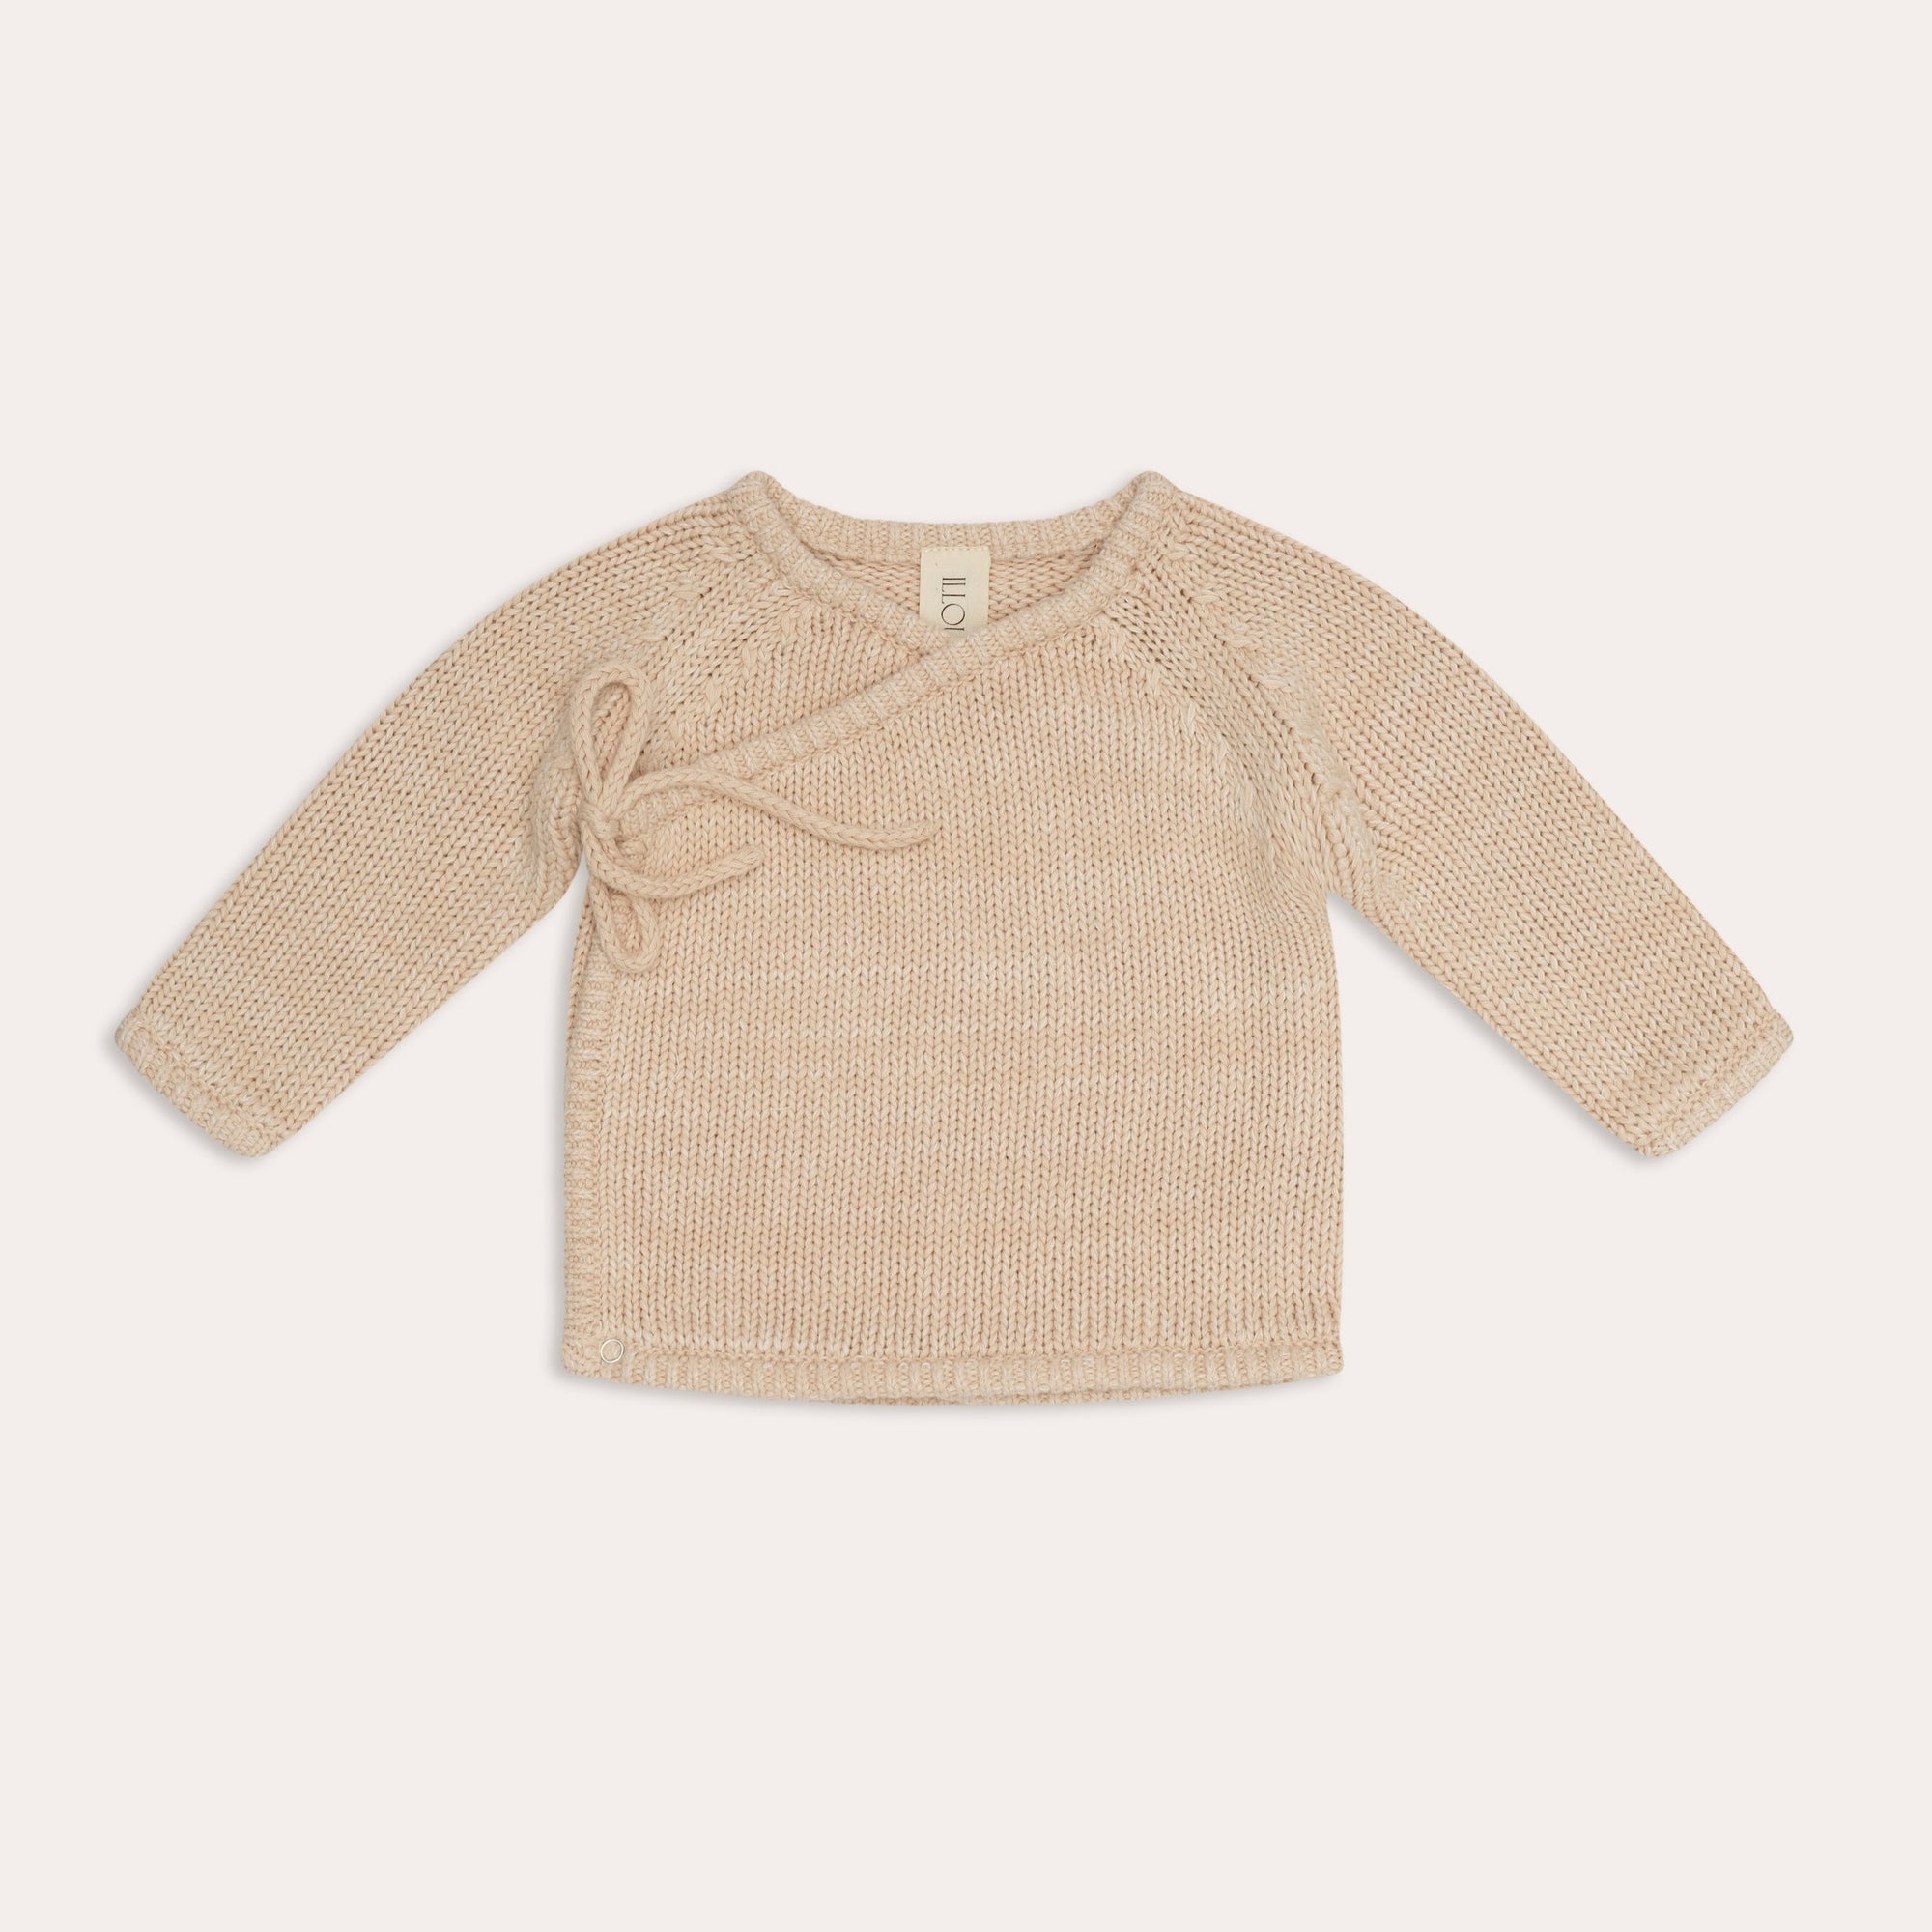 An Illoura the Label baby's knitted sweater in beige. (Product: illoura knit poet jumper | sand, Brand: Illoura the Label)